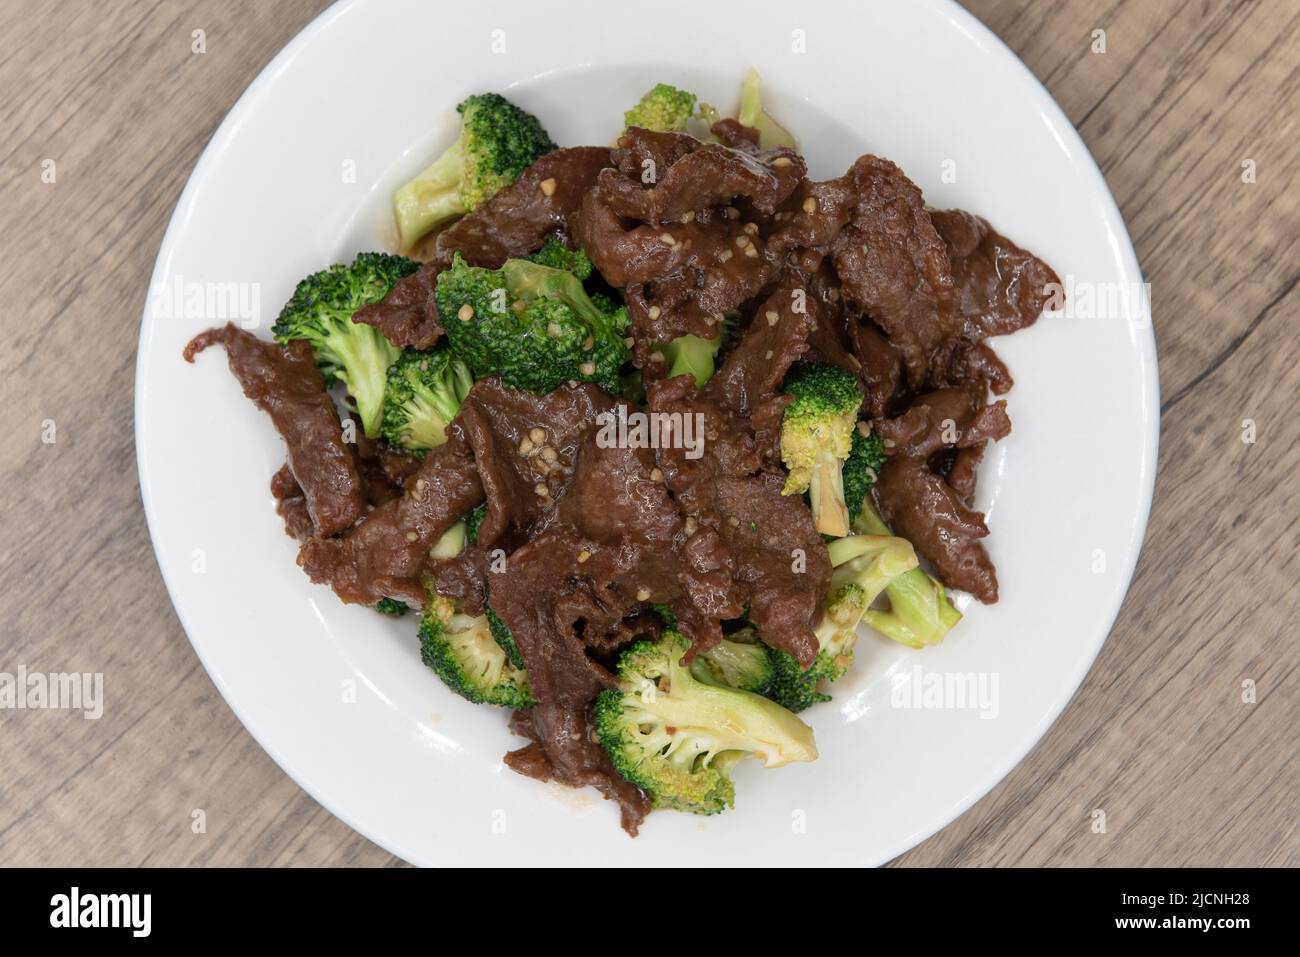 Overhead view of beef and broccoli glazed in savory sauce and piled high on the plate for a great Chinese food meal. Stock Photo